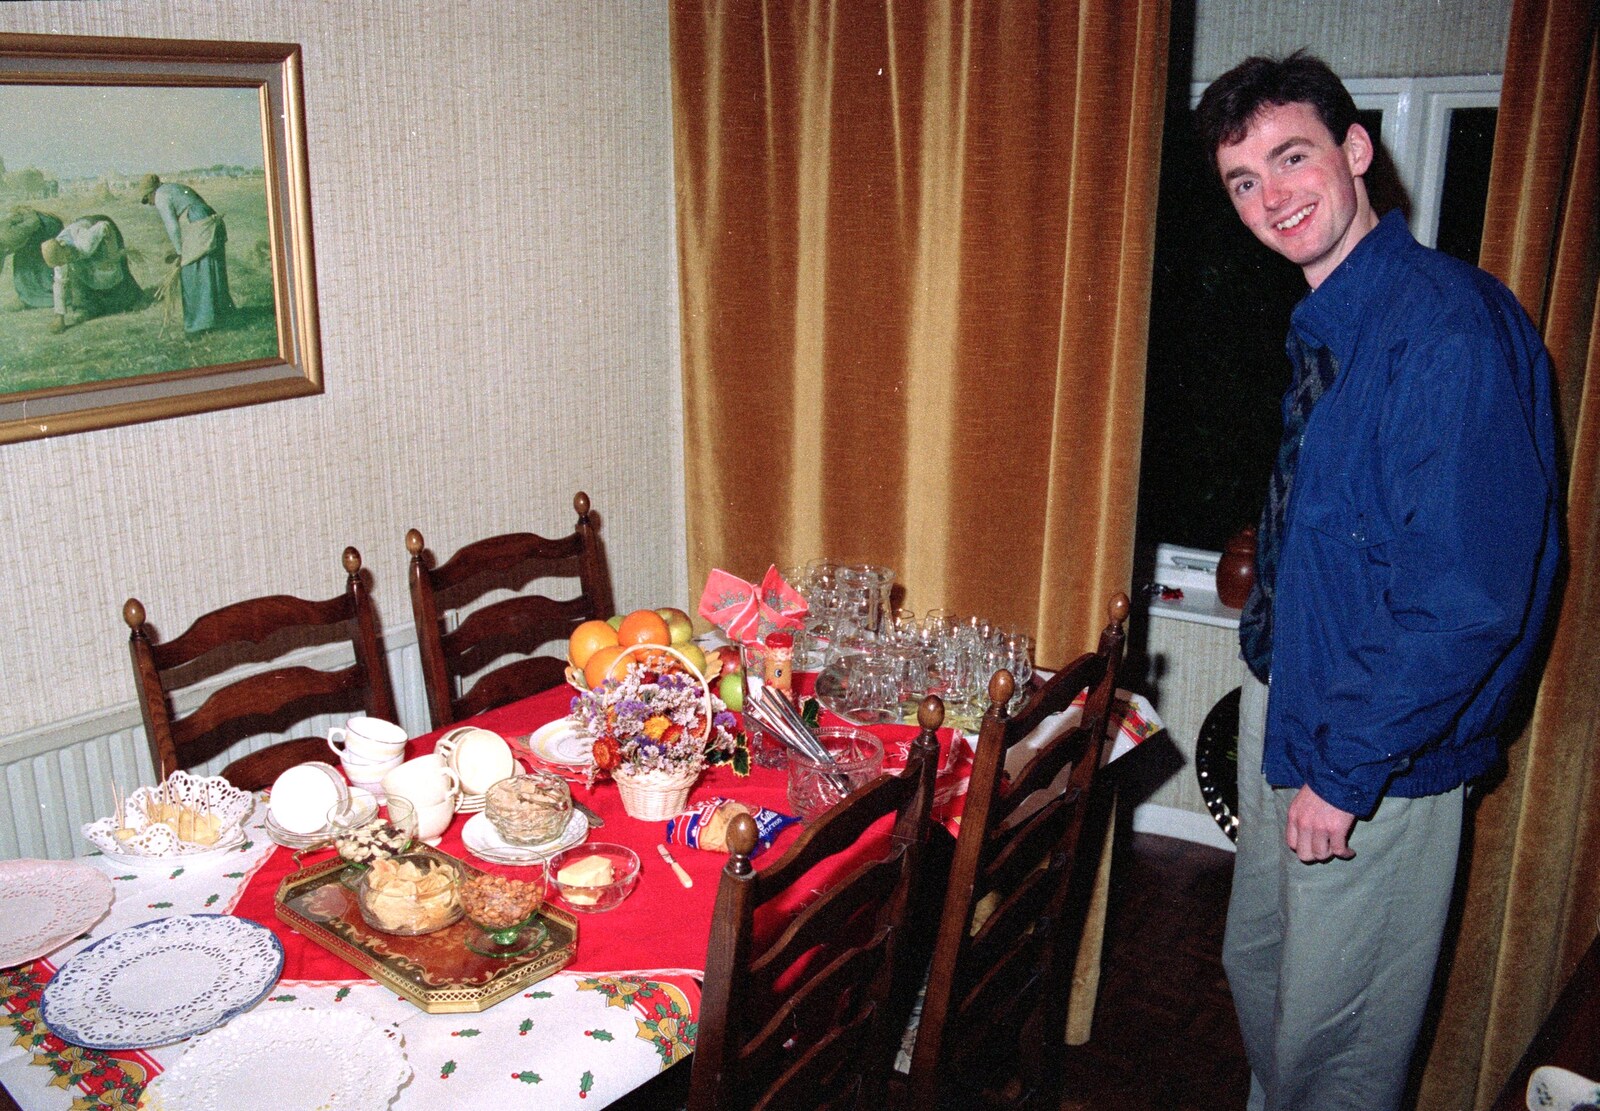 John looks at his parents' Christmas table from Uni: A Dinner Party, Harbertonford and Buckfastleigh, Devon - 24th December 1988